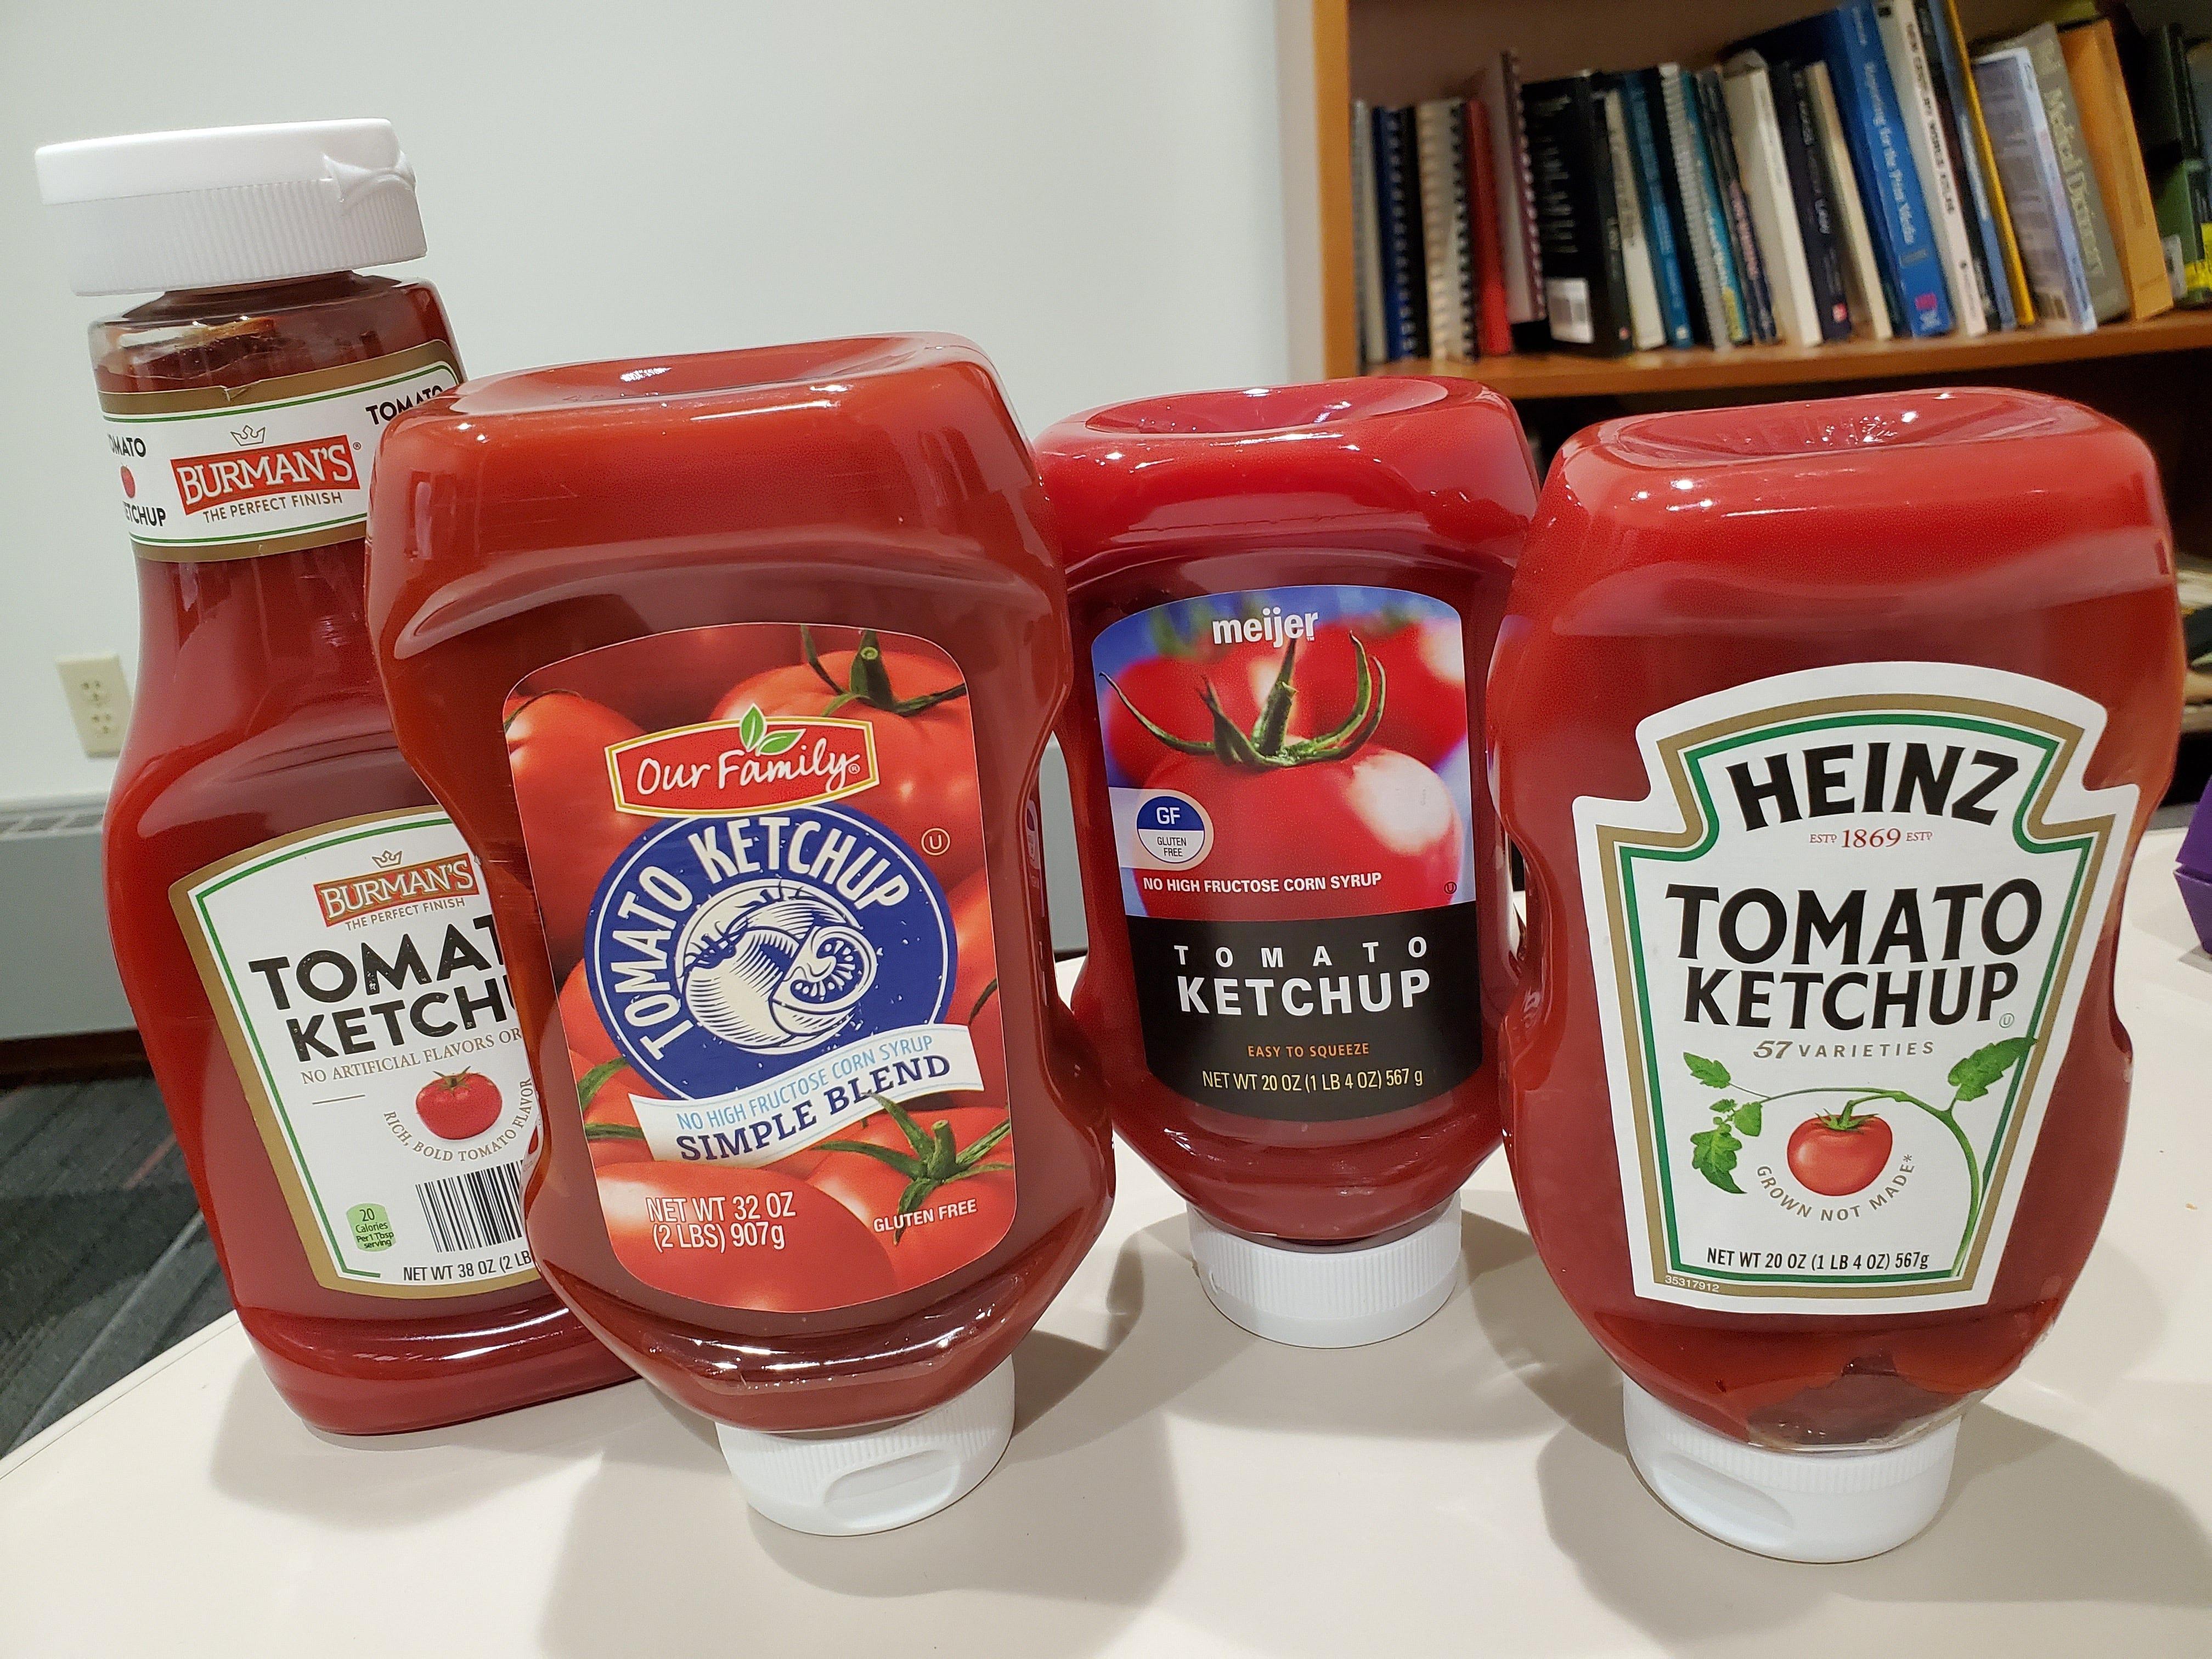 The Sentinel staff did a blind taste test comparing Heinz ketchup to that of Burman